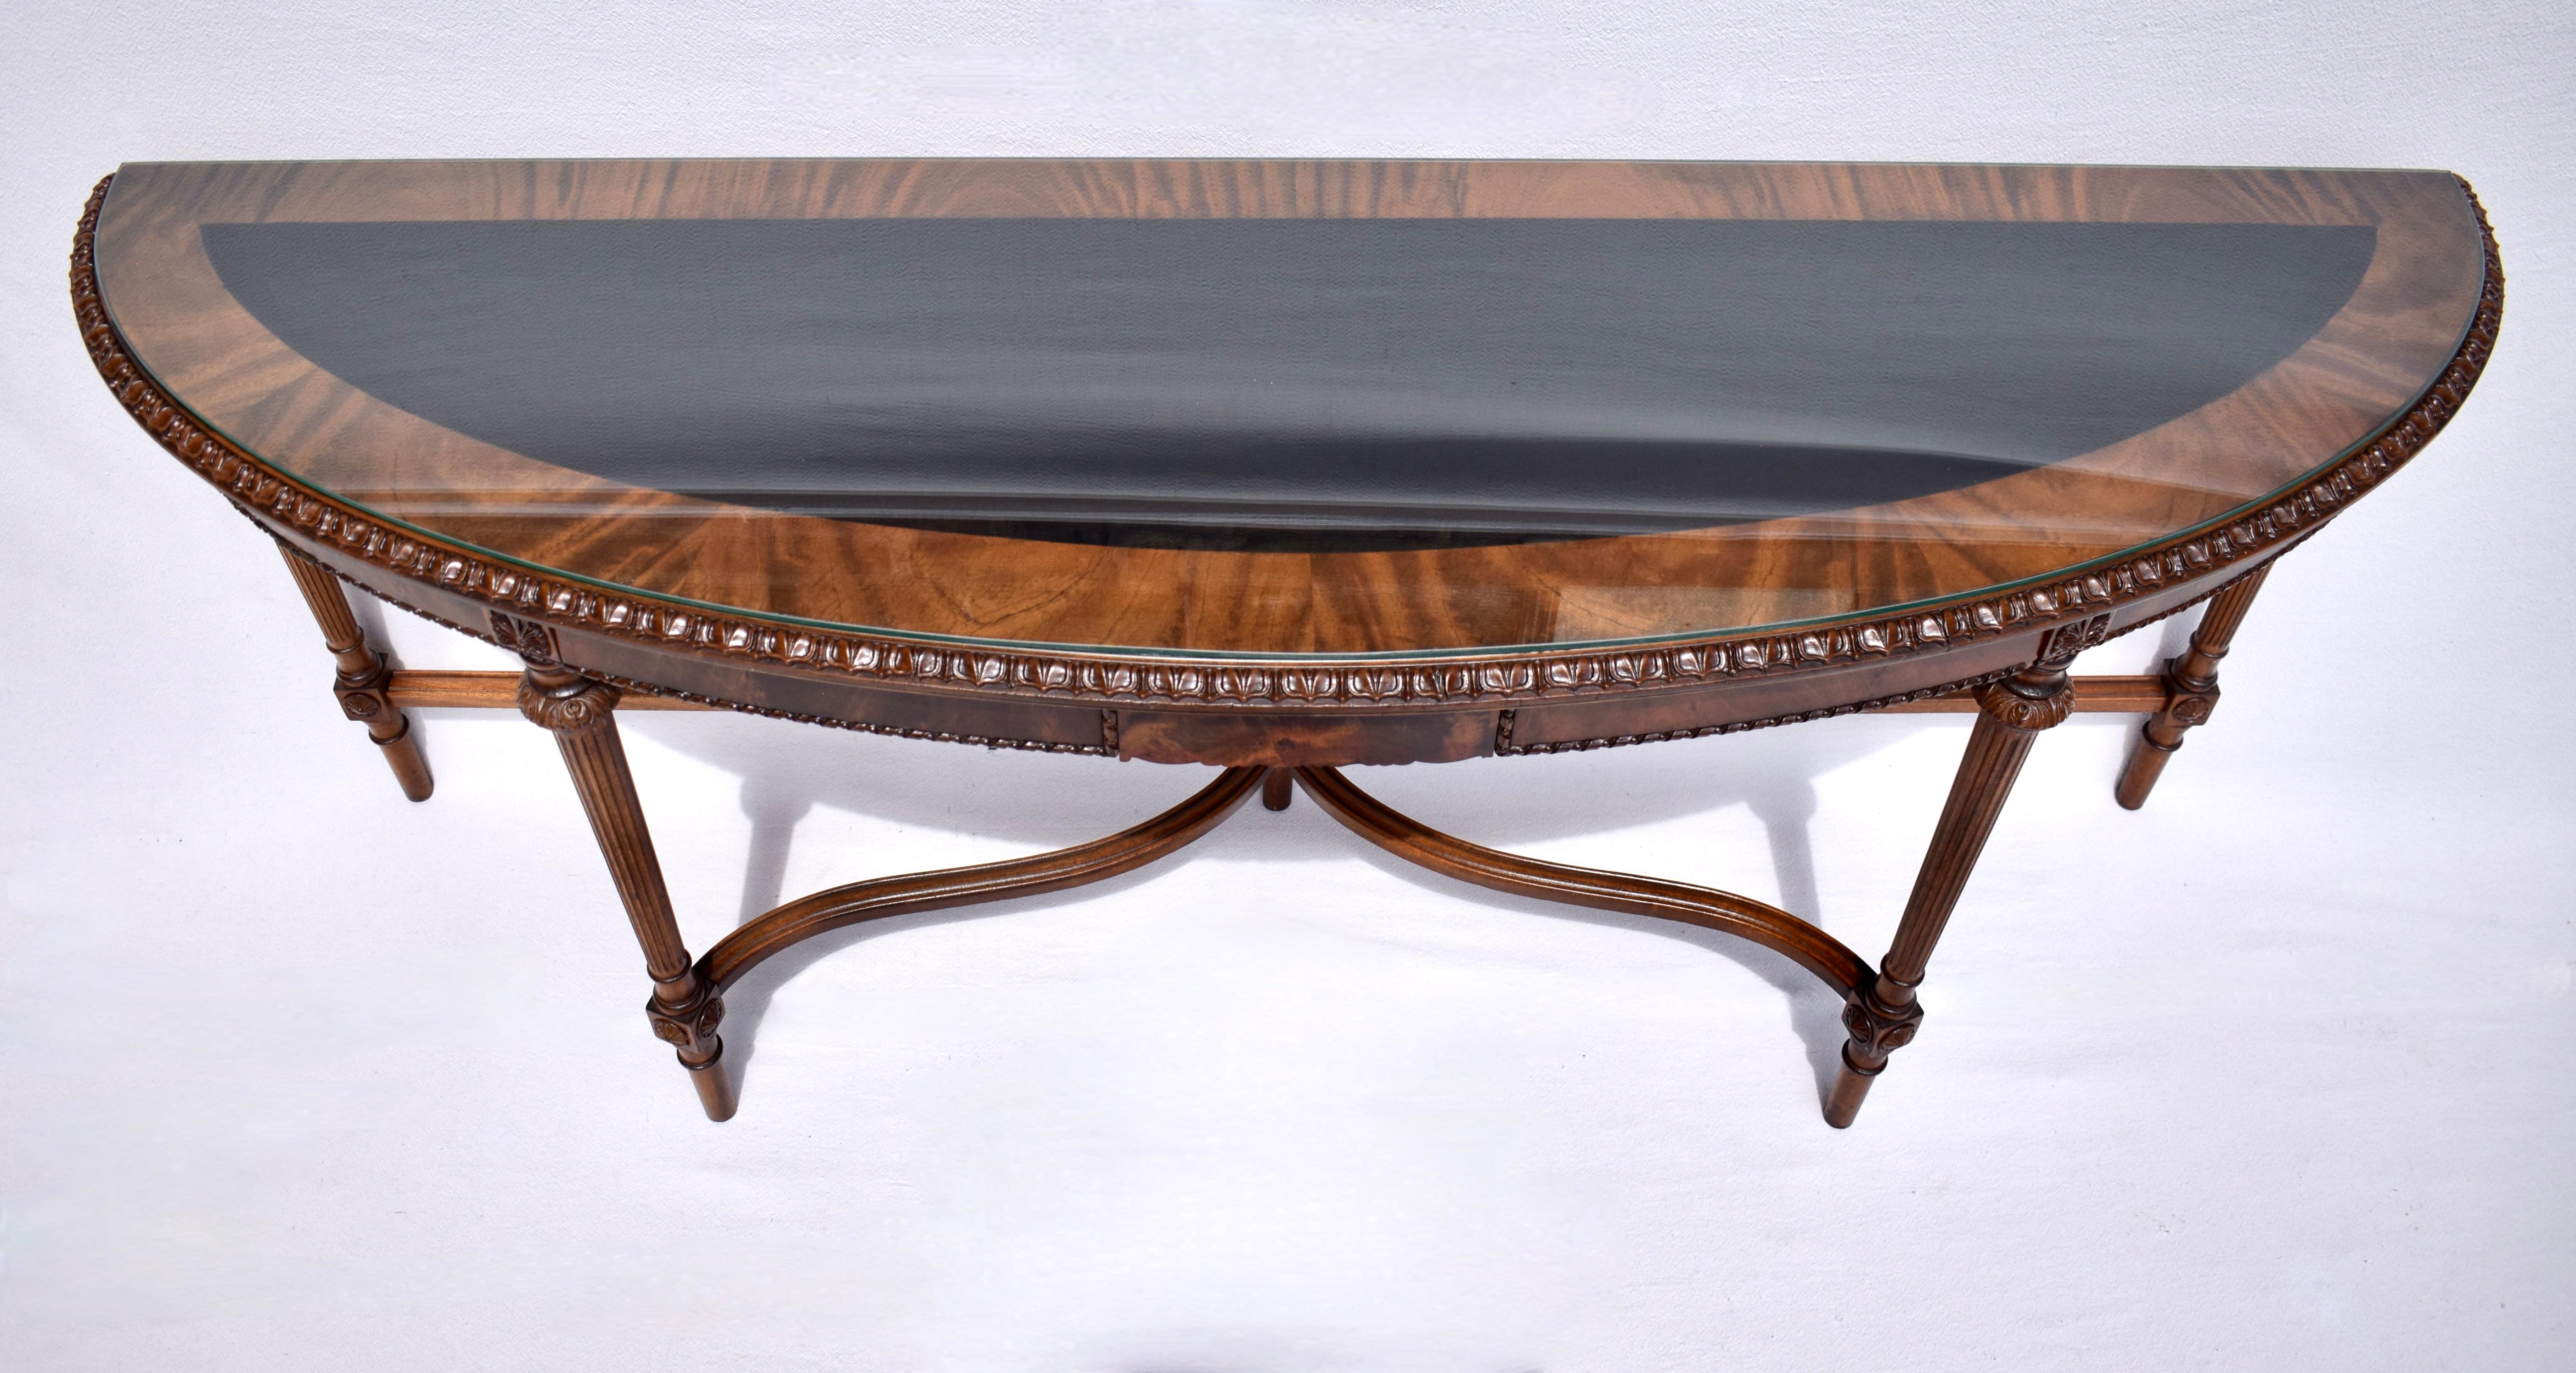 Long Louis XVI style Demi Lune Console table with two pocket drawers accented with carved details throughout, exquisite fiery Mahogany wood grains, resting on five reeded tapered legs & serpentine stretcher. Includes custom polished edge glass top.